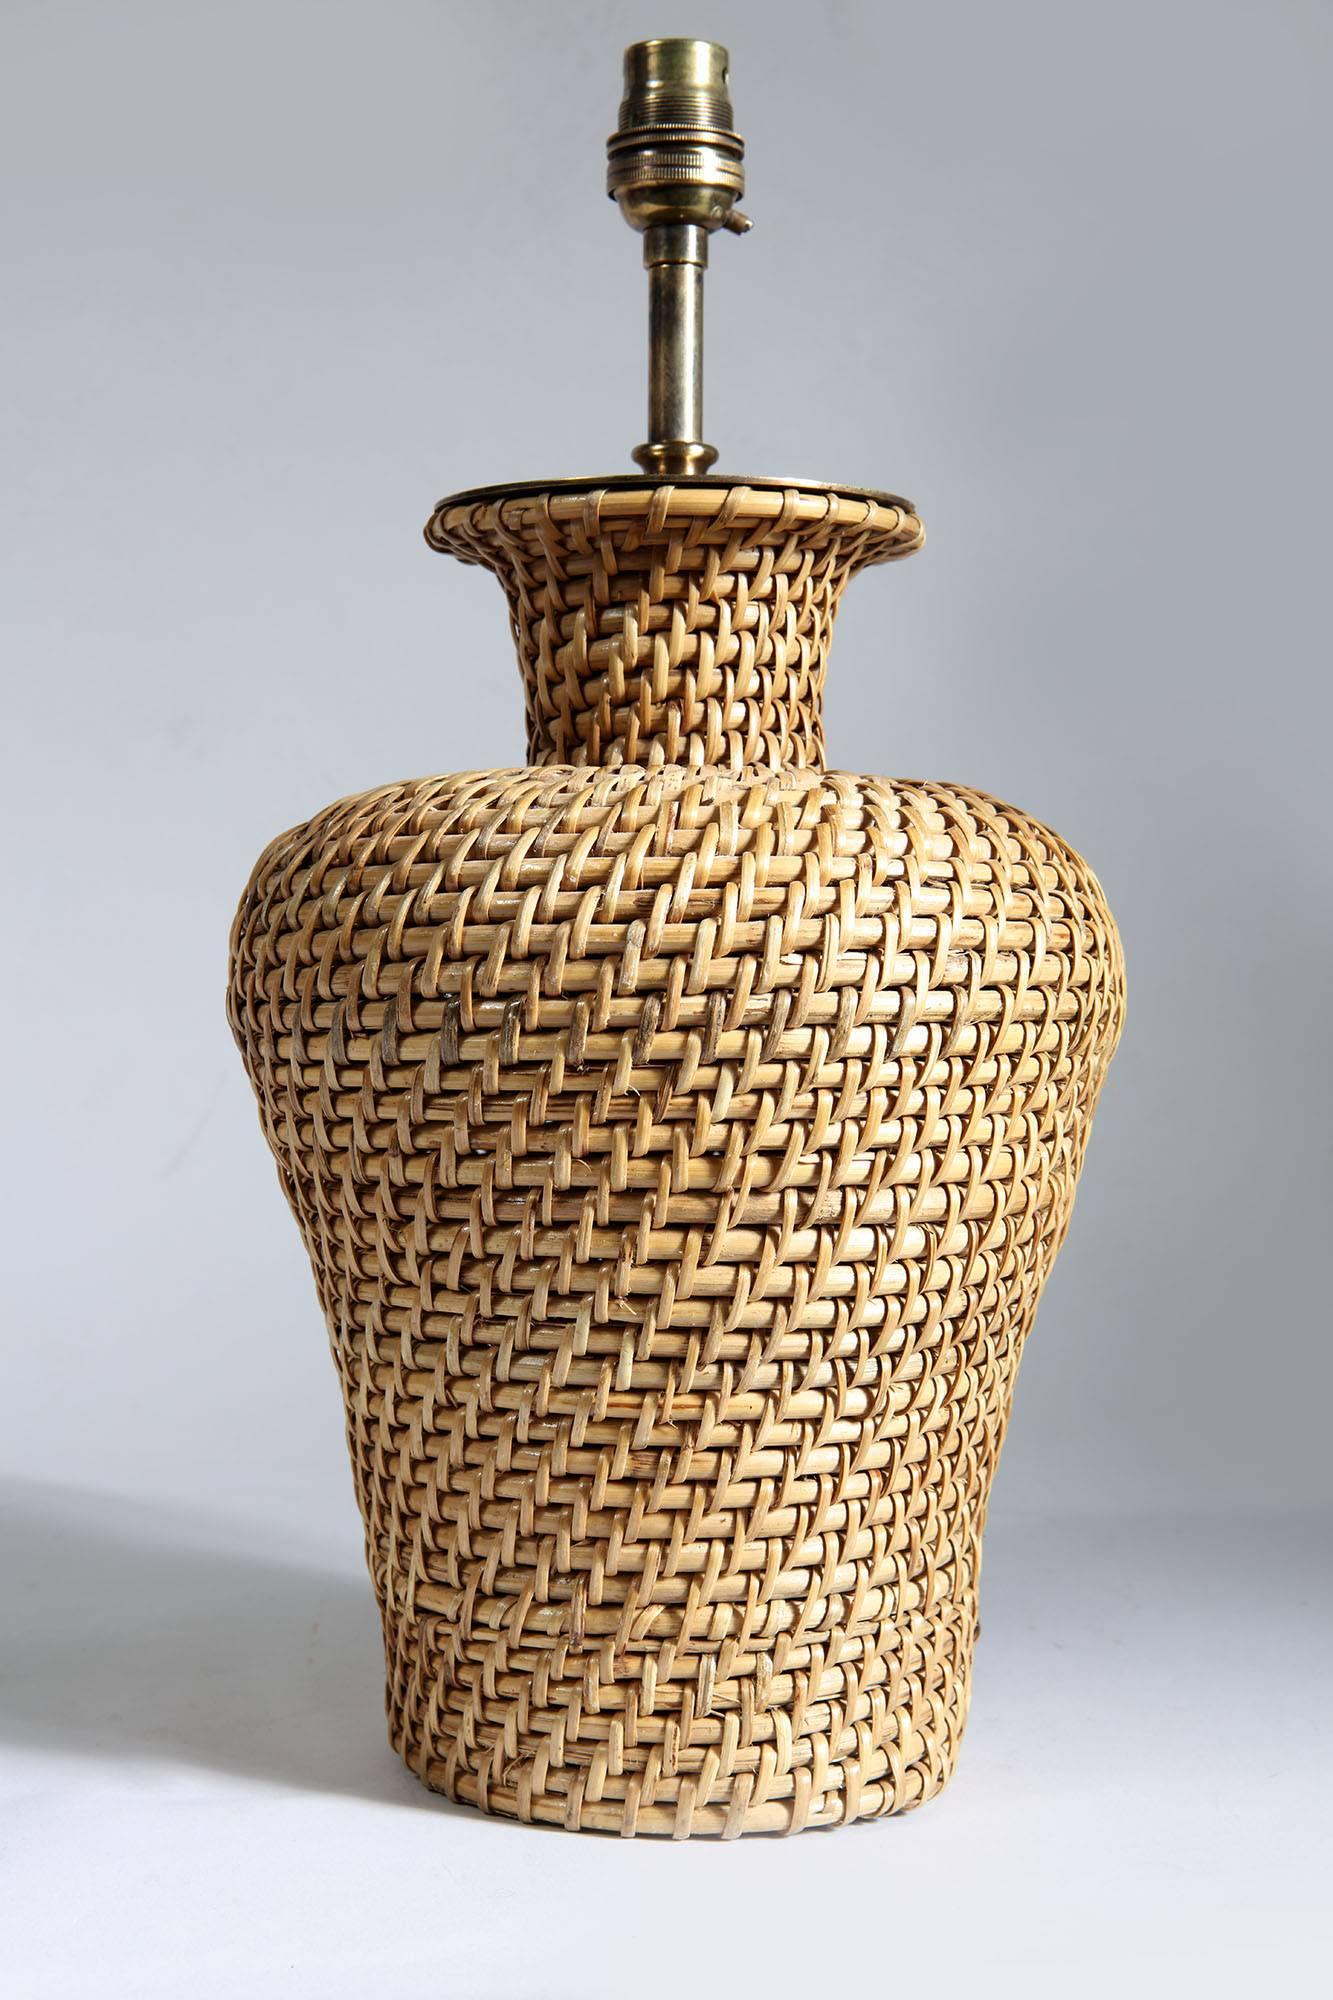 A pair of rattan straw weaved vases now converted to lamps.